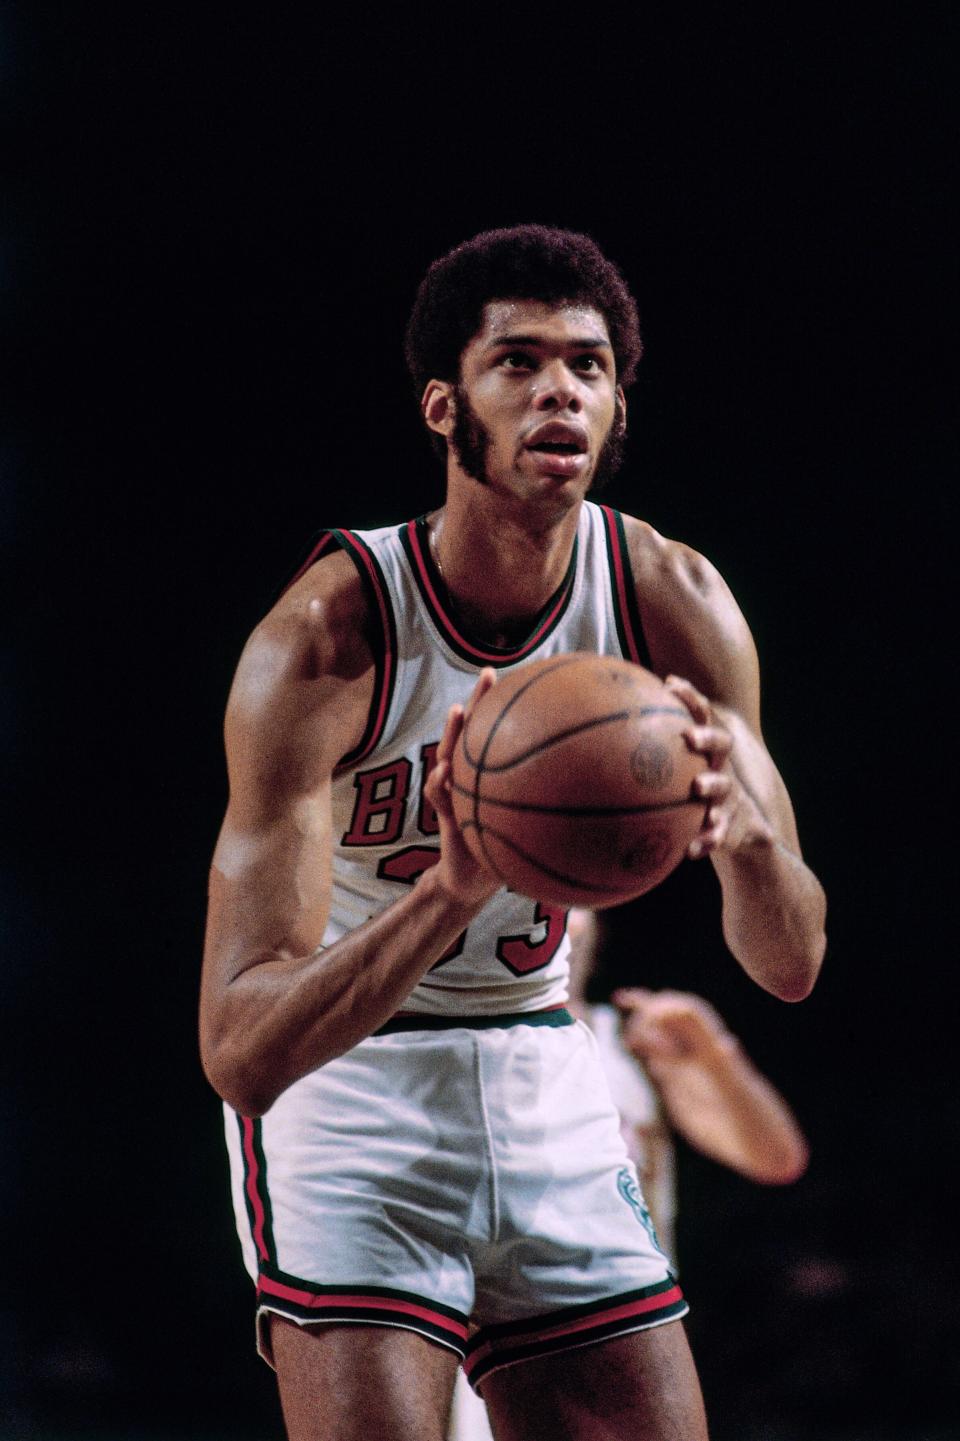 Kareem Abdul-Jabbar, pictured in 1971 with the Milwaukee Bucks, scored 38,387 career points in his NBA career, a record that could fall Tuesday night if Lakers forward LeBron James scores 36 points against the Oklahoma City Thunder.